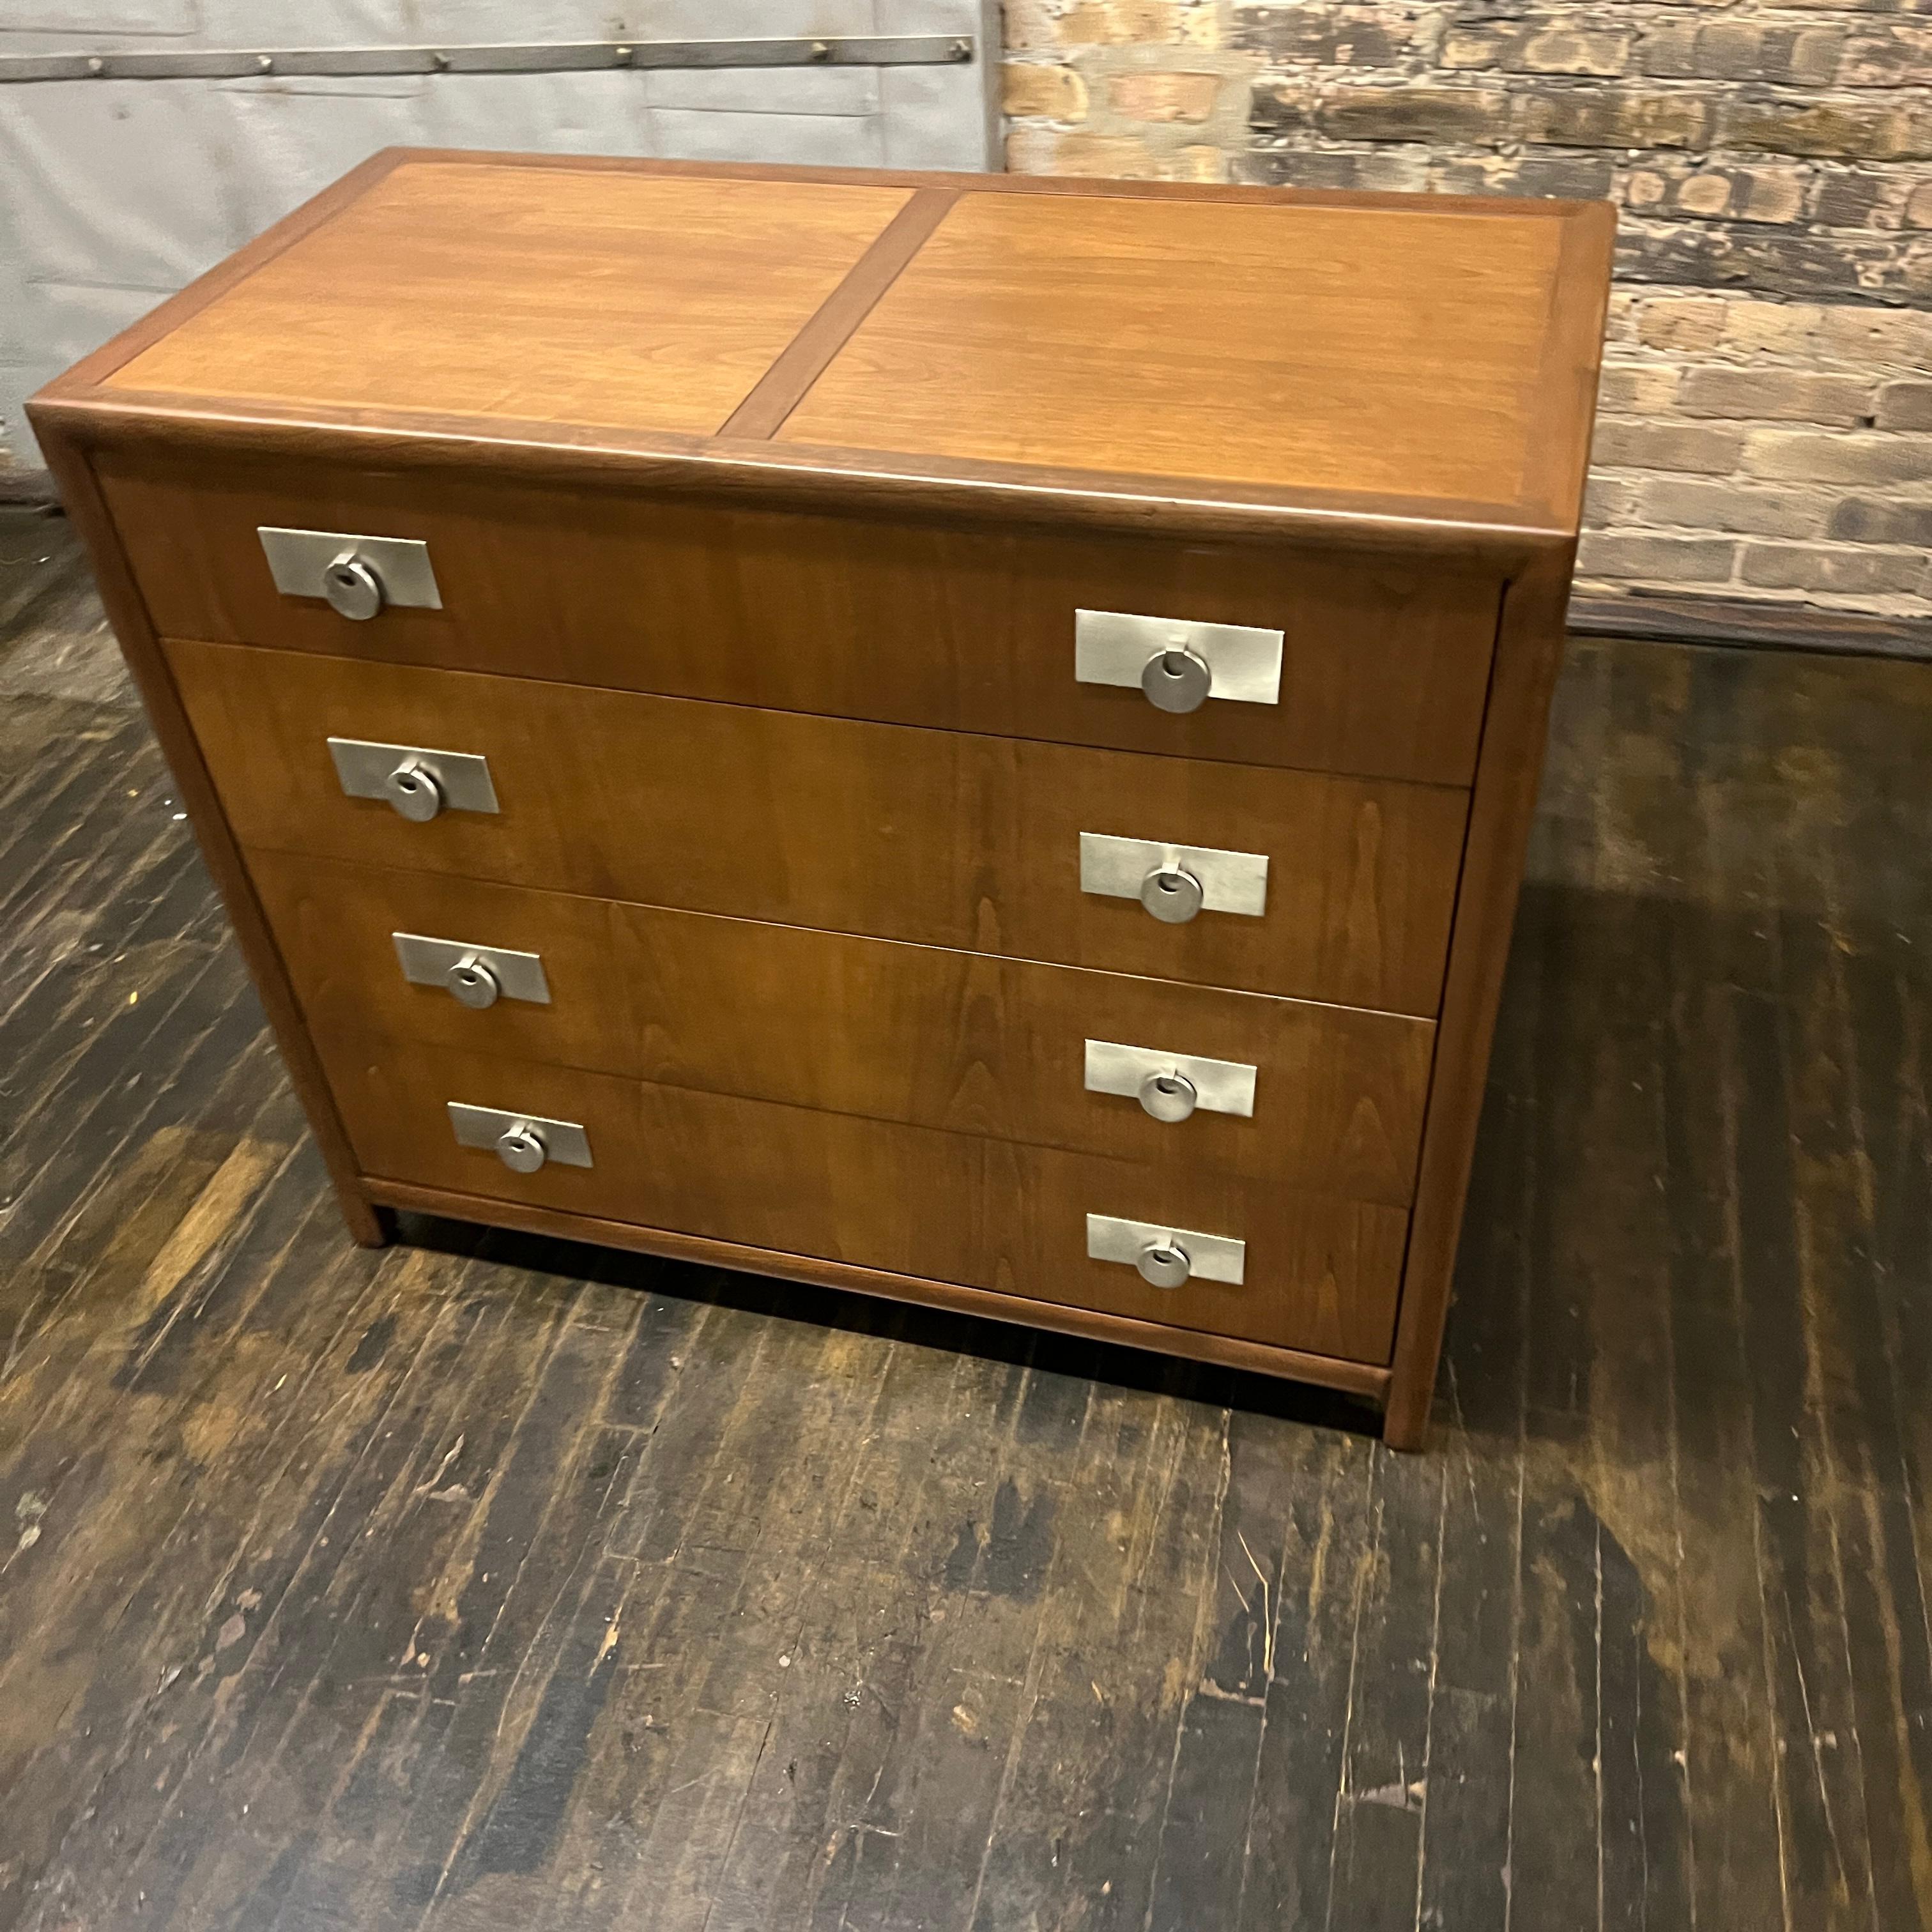 Beautiful four drawer dressers by Michael Taylor for Baker, from his New World Collection. This lovely chest of drawers has been expertly restored and features a satin finish.  The wood grain on this piece is amazing.  The drawers are spacious (top